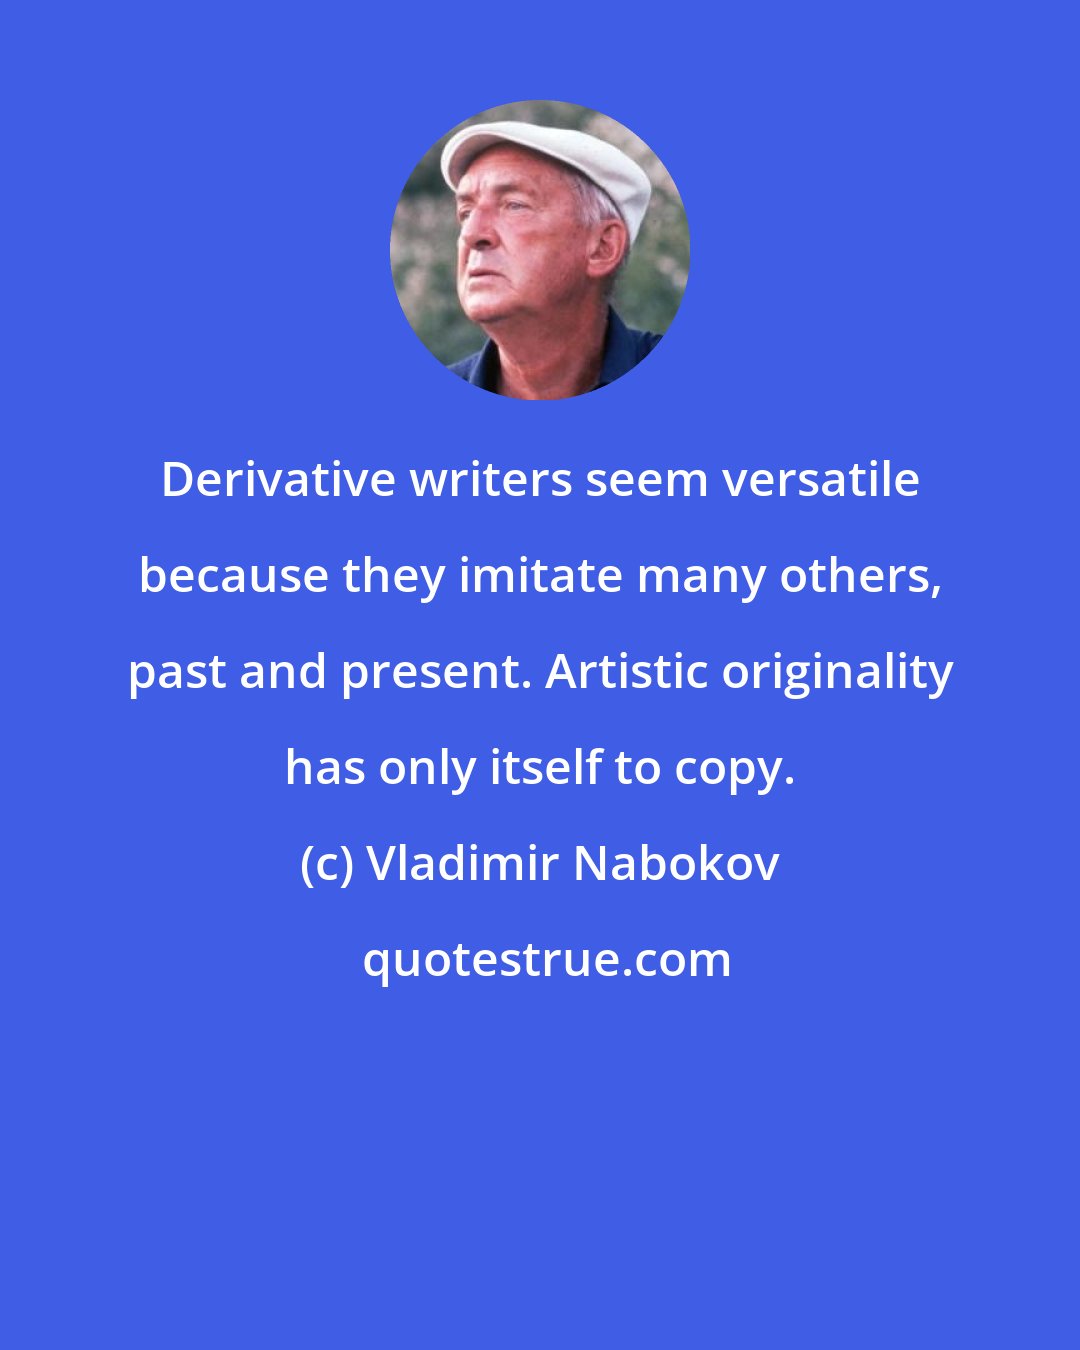 Vladimir Nabokov: Derivative writers seem versatile because they imitate many others, past and present. Artistic originality has only itself to copy.